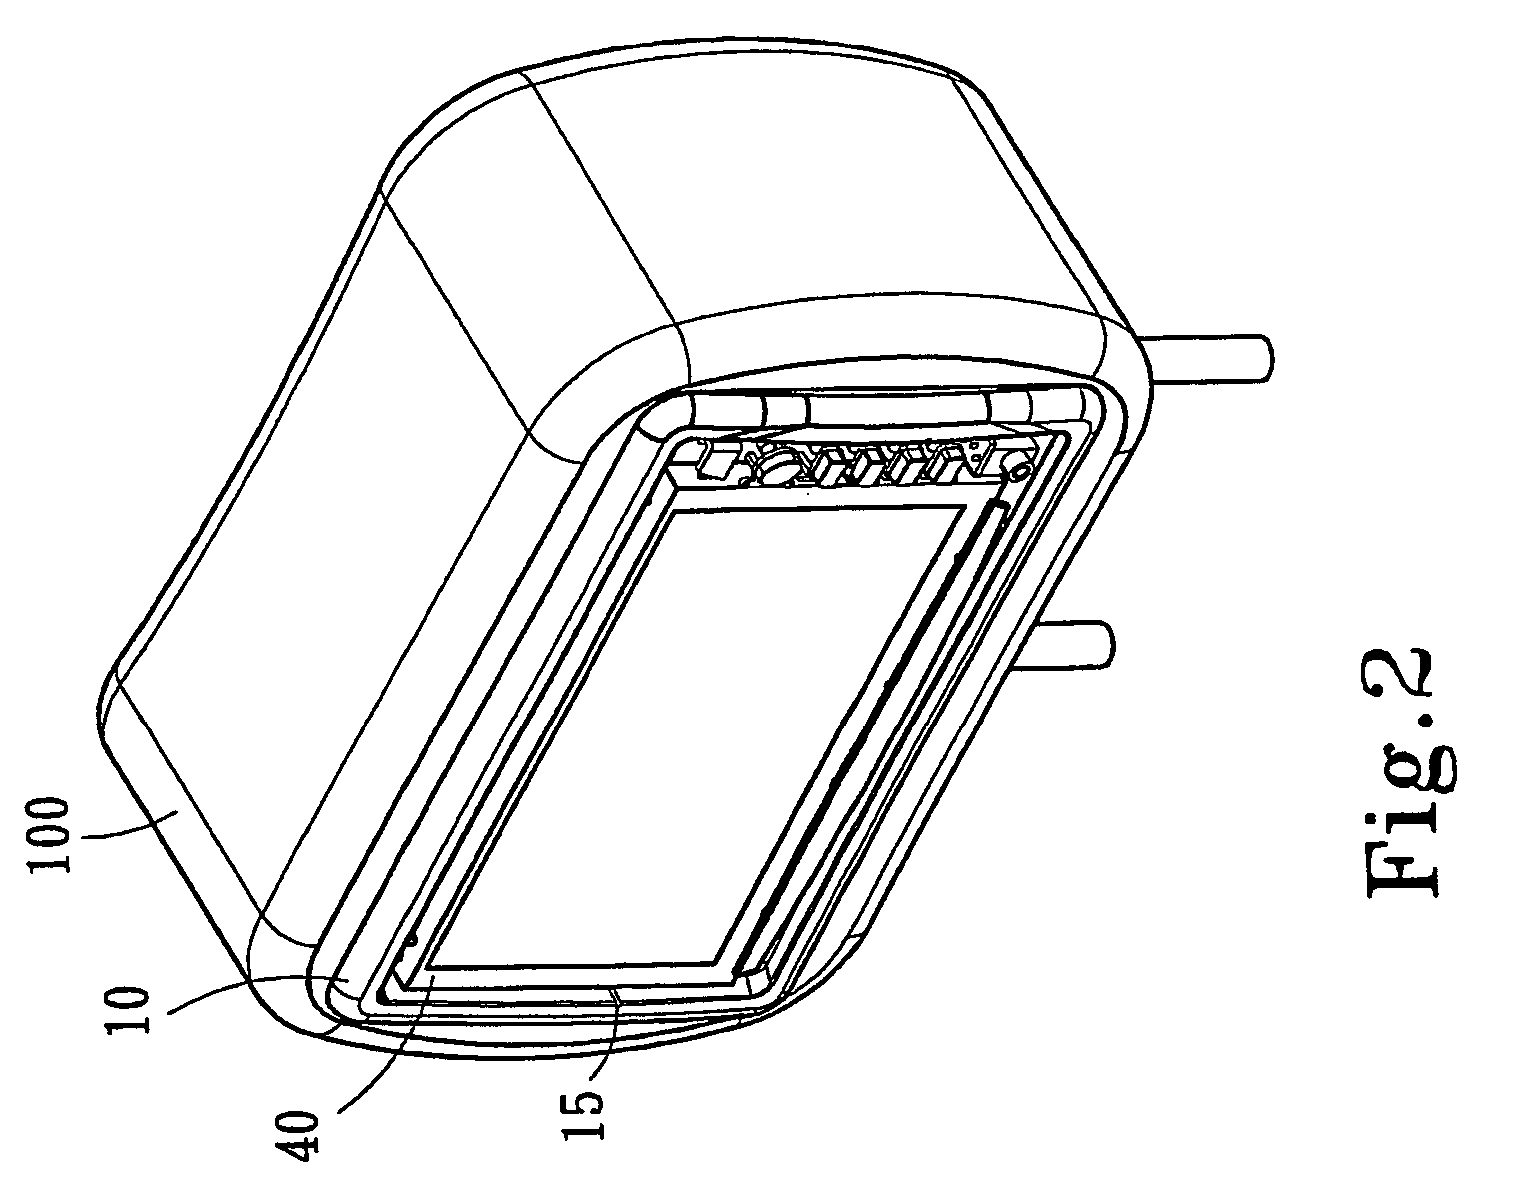 Mounting apparatus of displayer suitable for external installation and inset installation